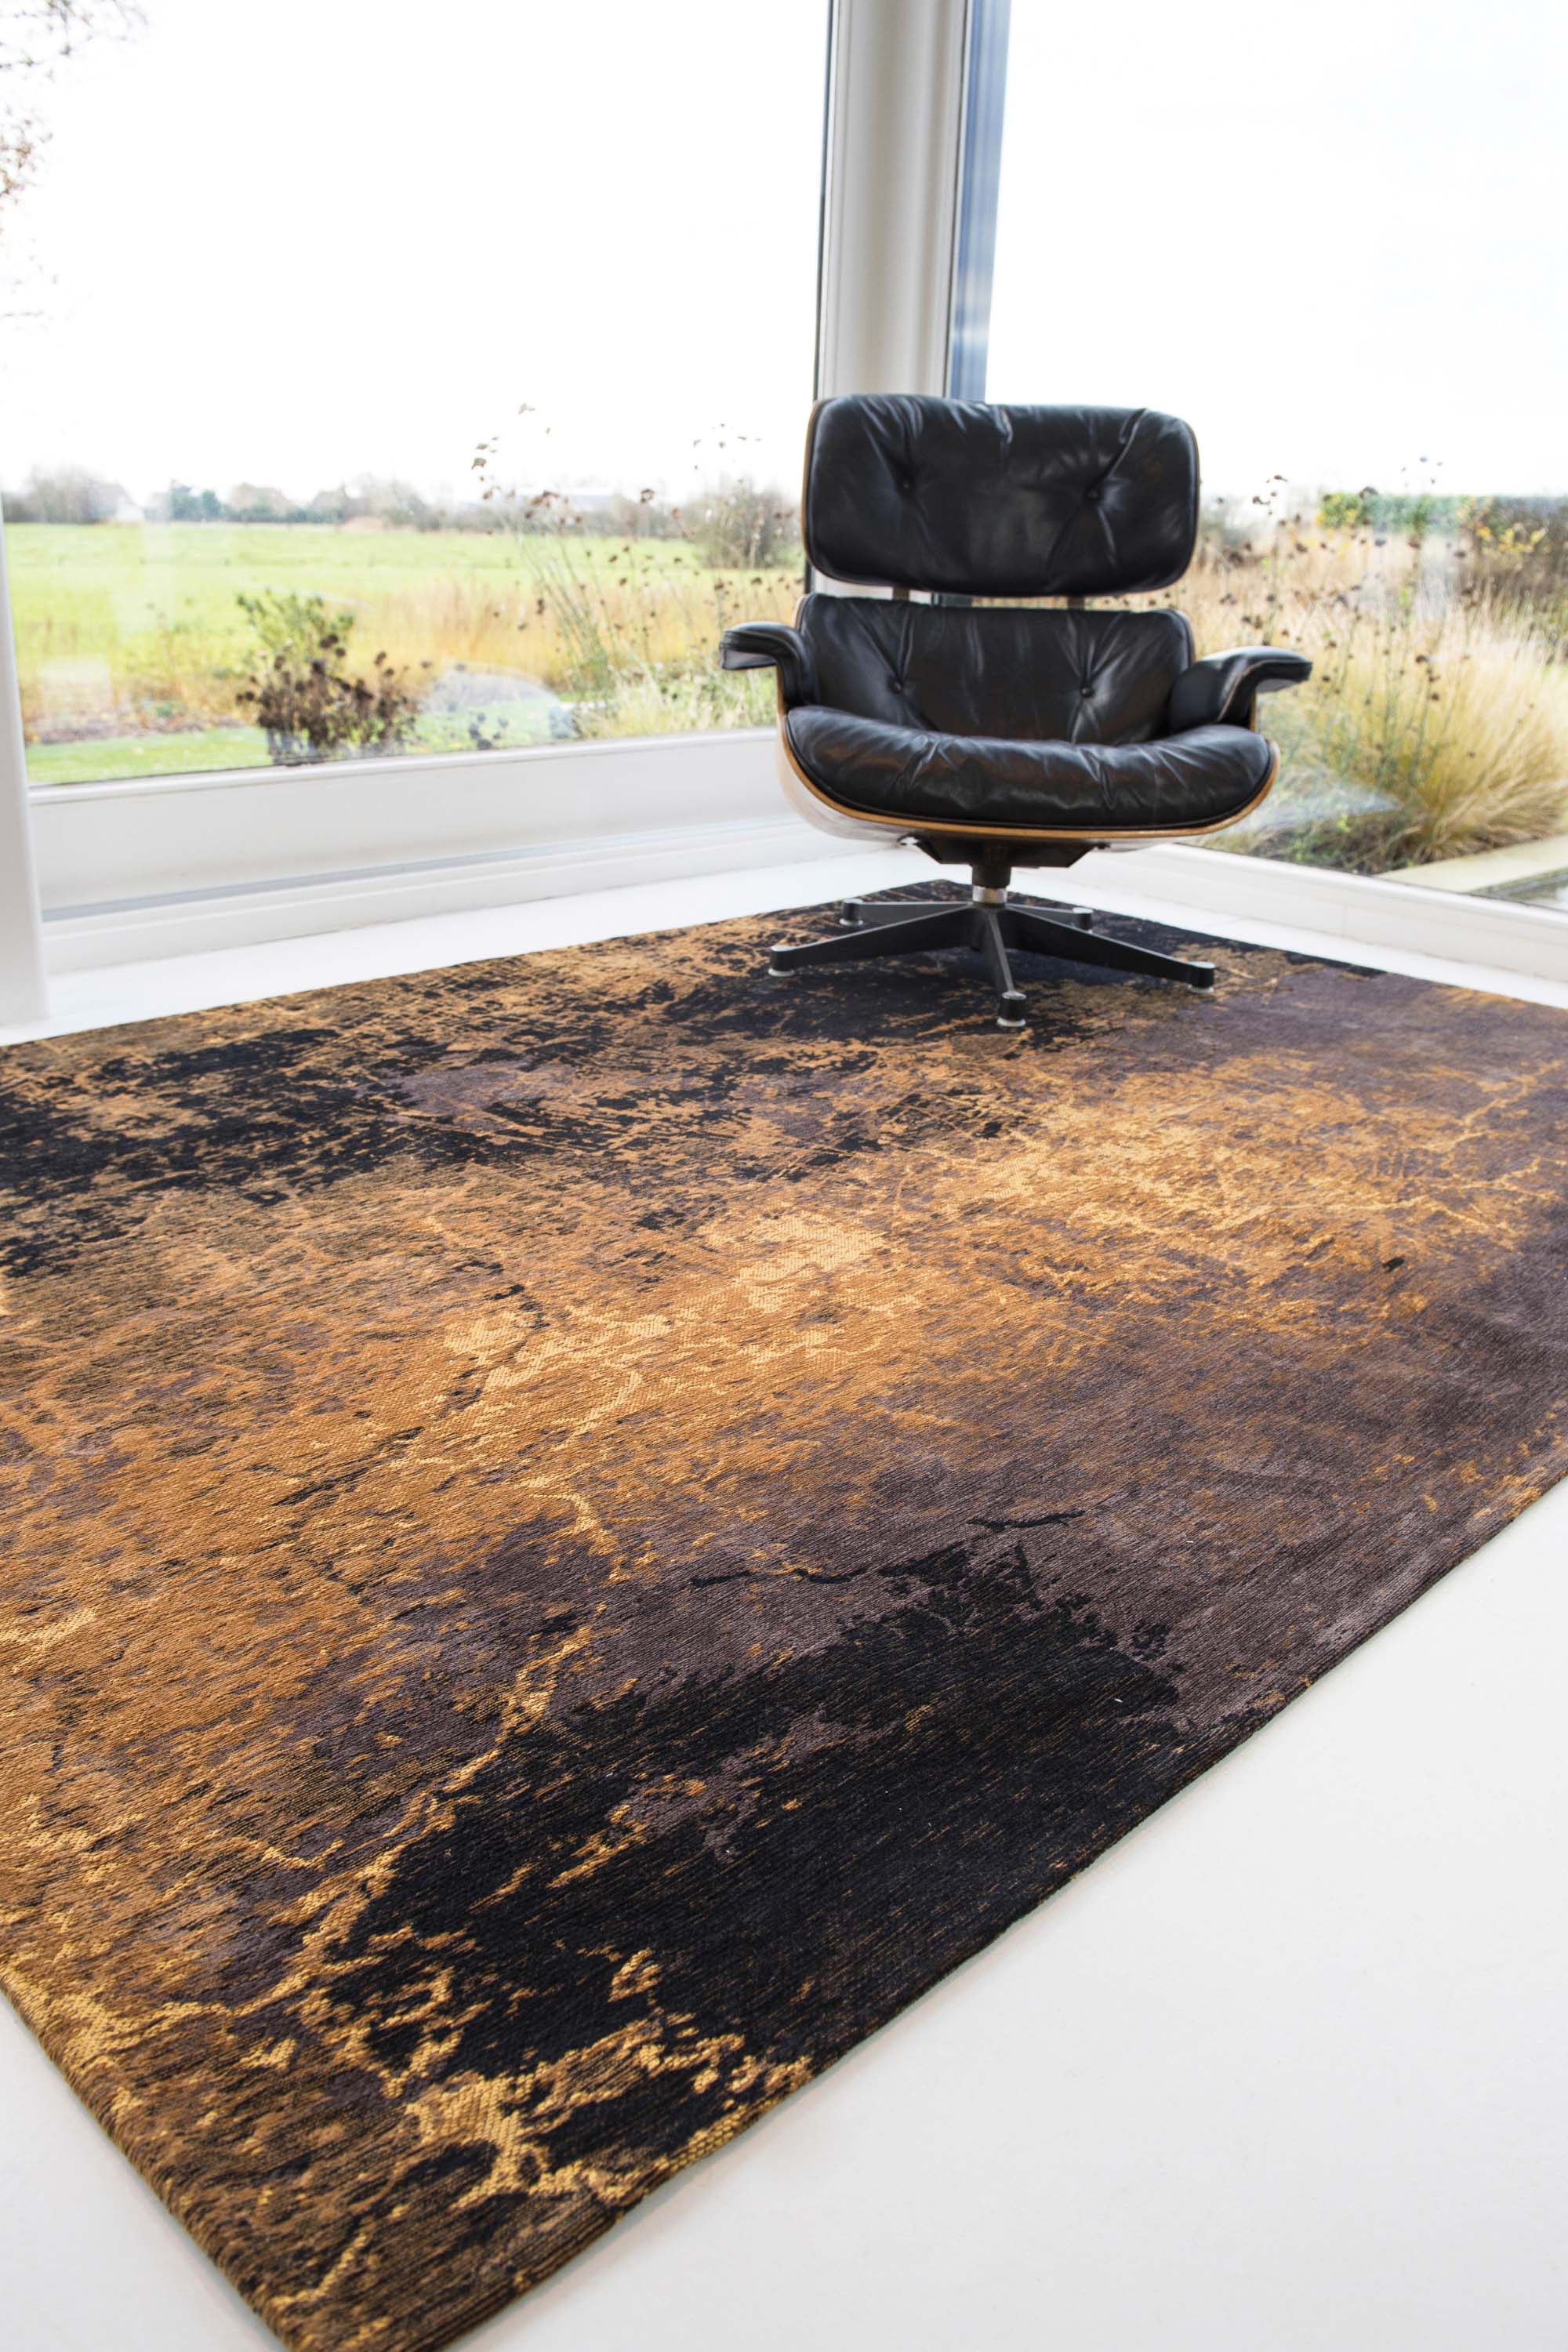 Flatweave rug with faded jagged abstract design in copper and charcoal